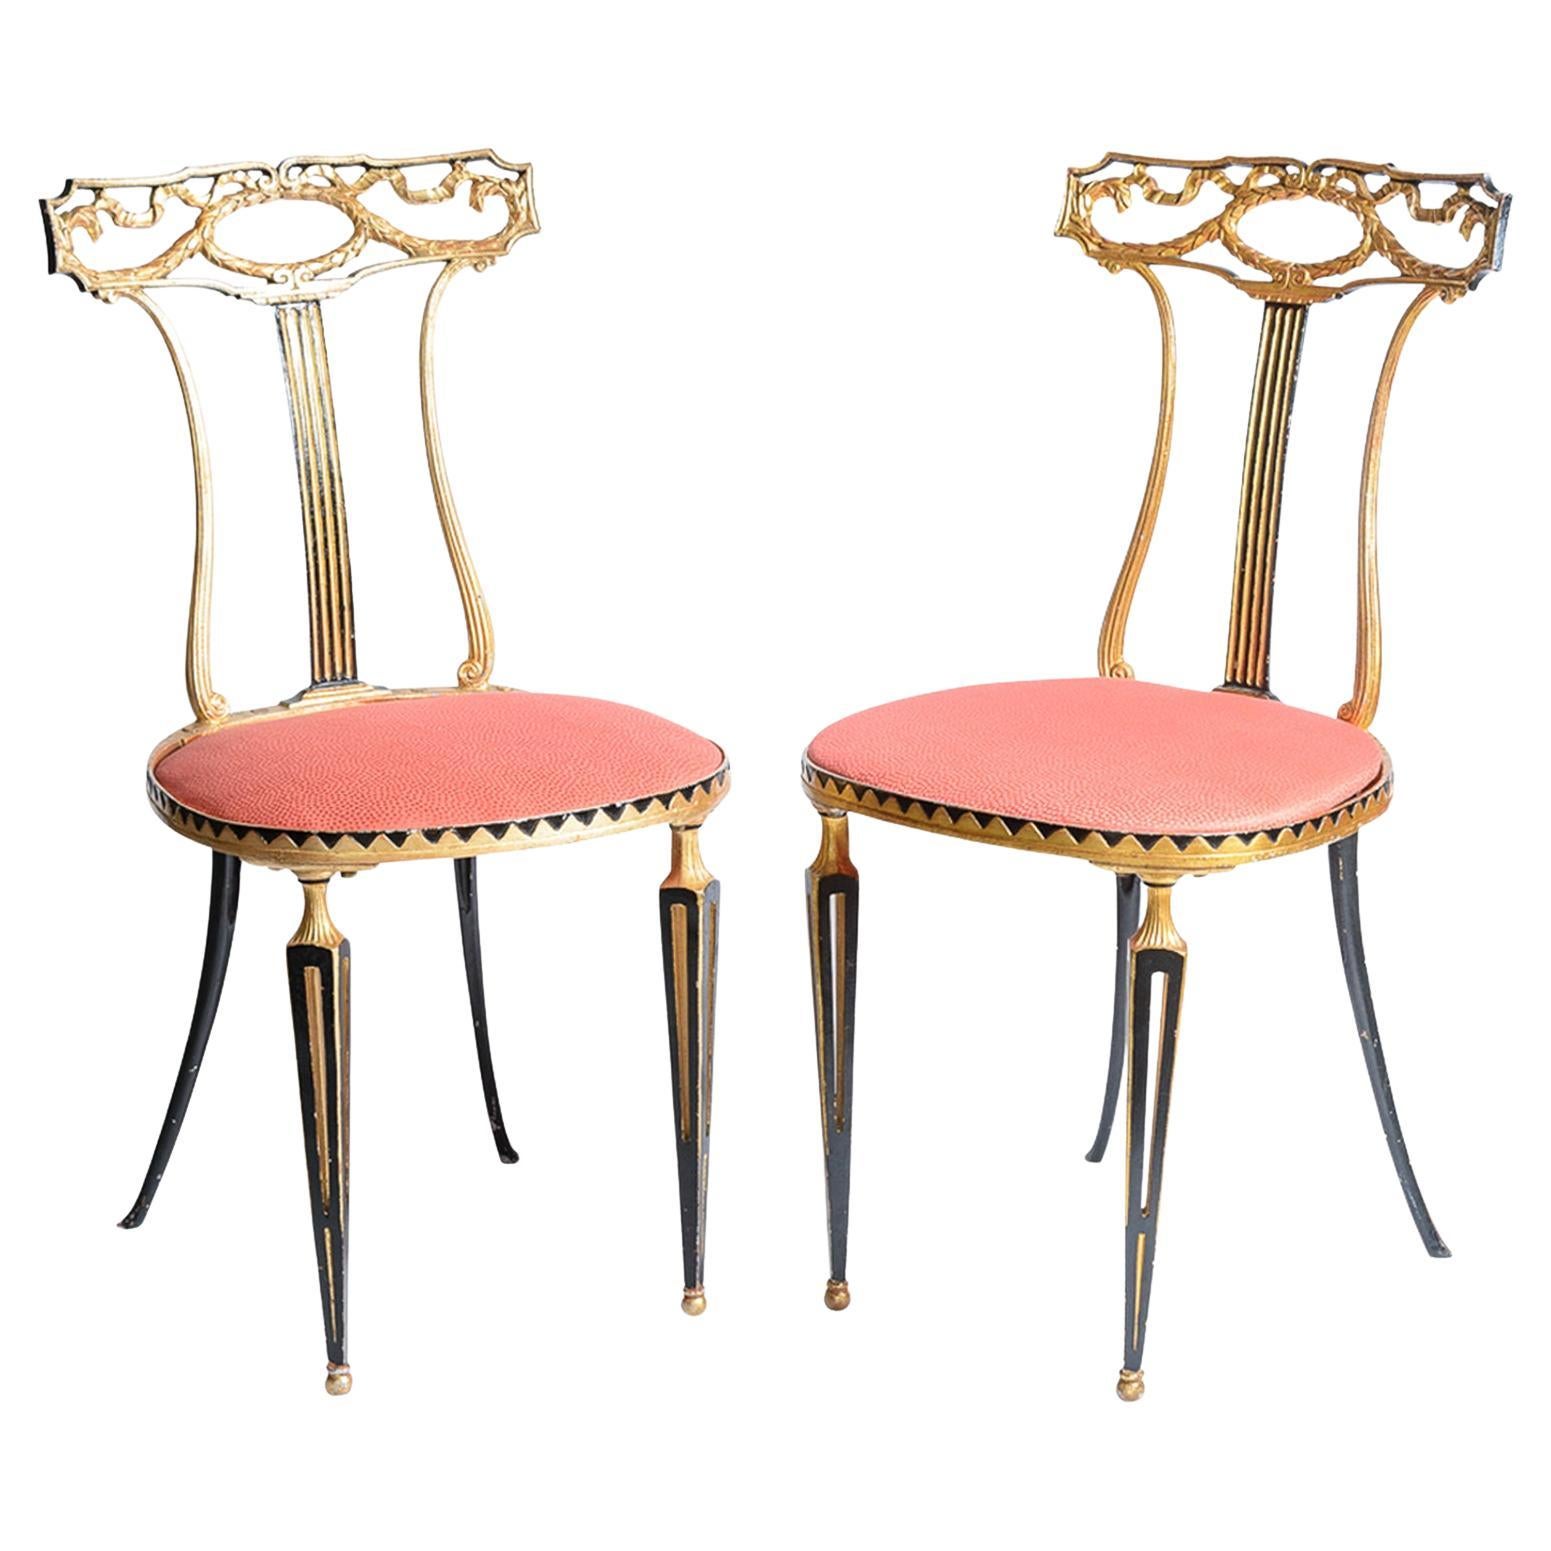 Italian Neoclassical Style Gilt Metal Chairs by Palladio, A-Pair For Sale